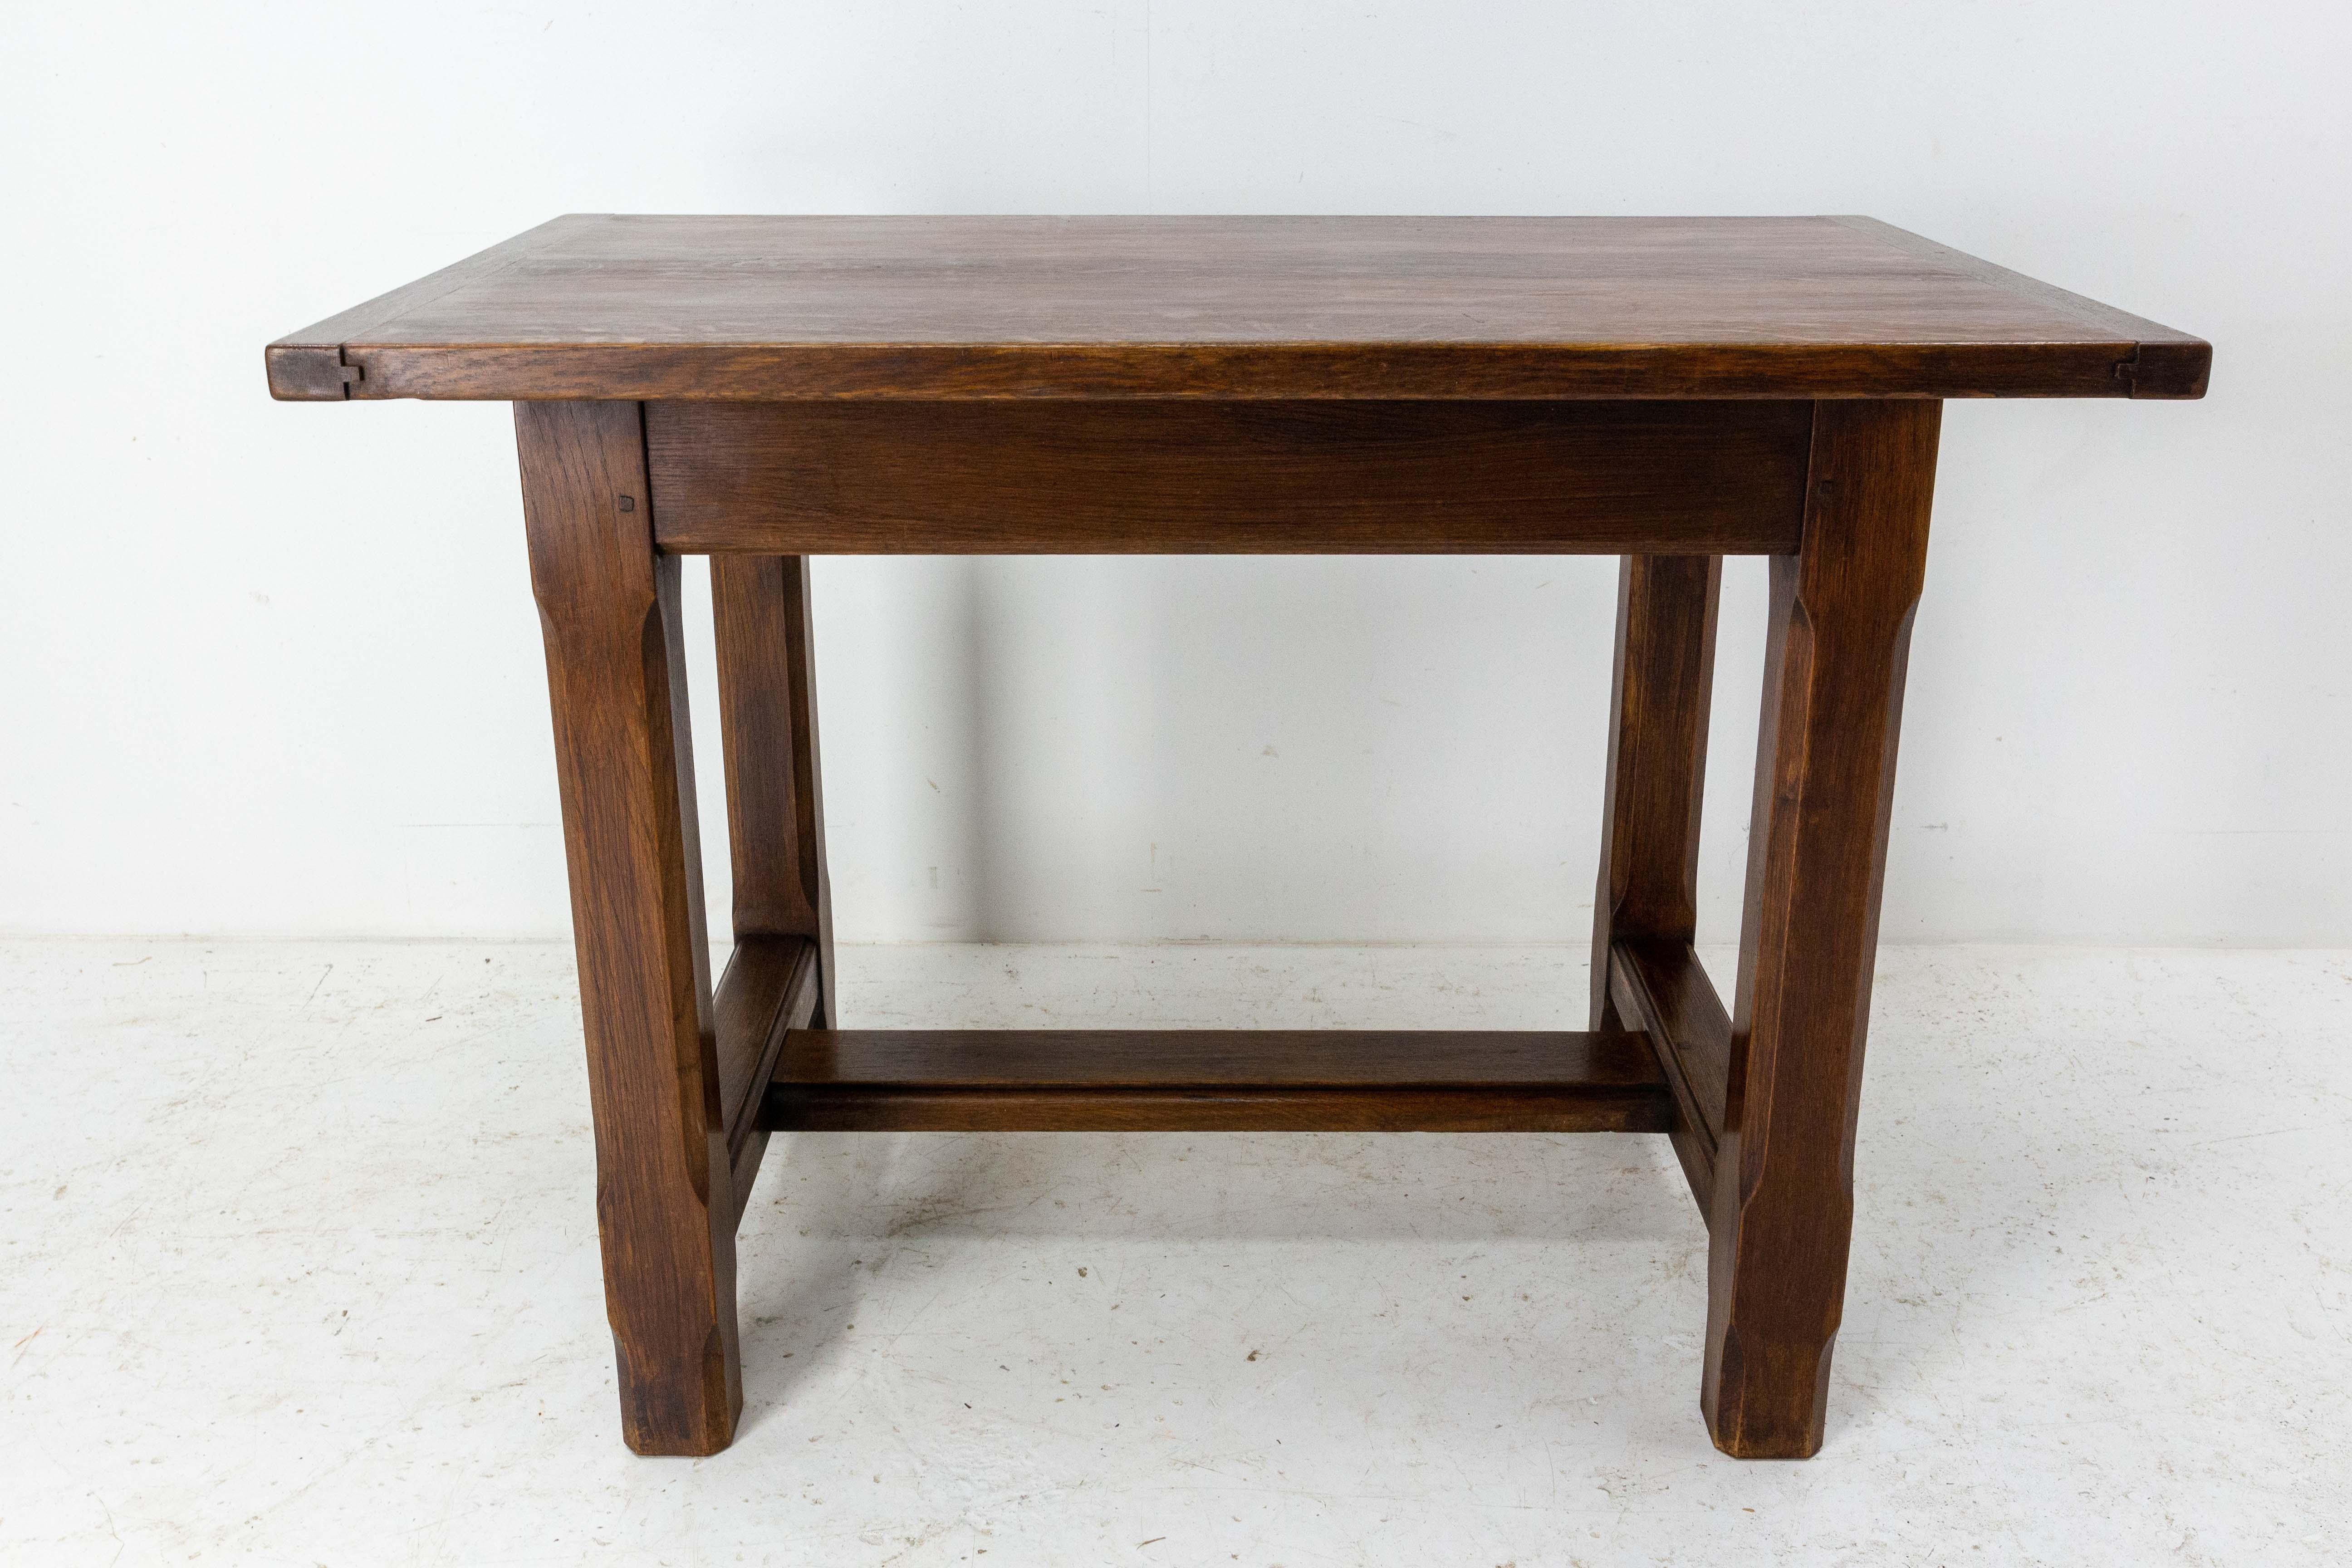 French little dining table in massive oak.
Mid-century, circa 1970.
Dimension between the floor and the table : 24.41 in. (62 cm).
Good condition.
Sold without stools
Shipping:
wooden case L 110 P69 H79 63kg.

